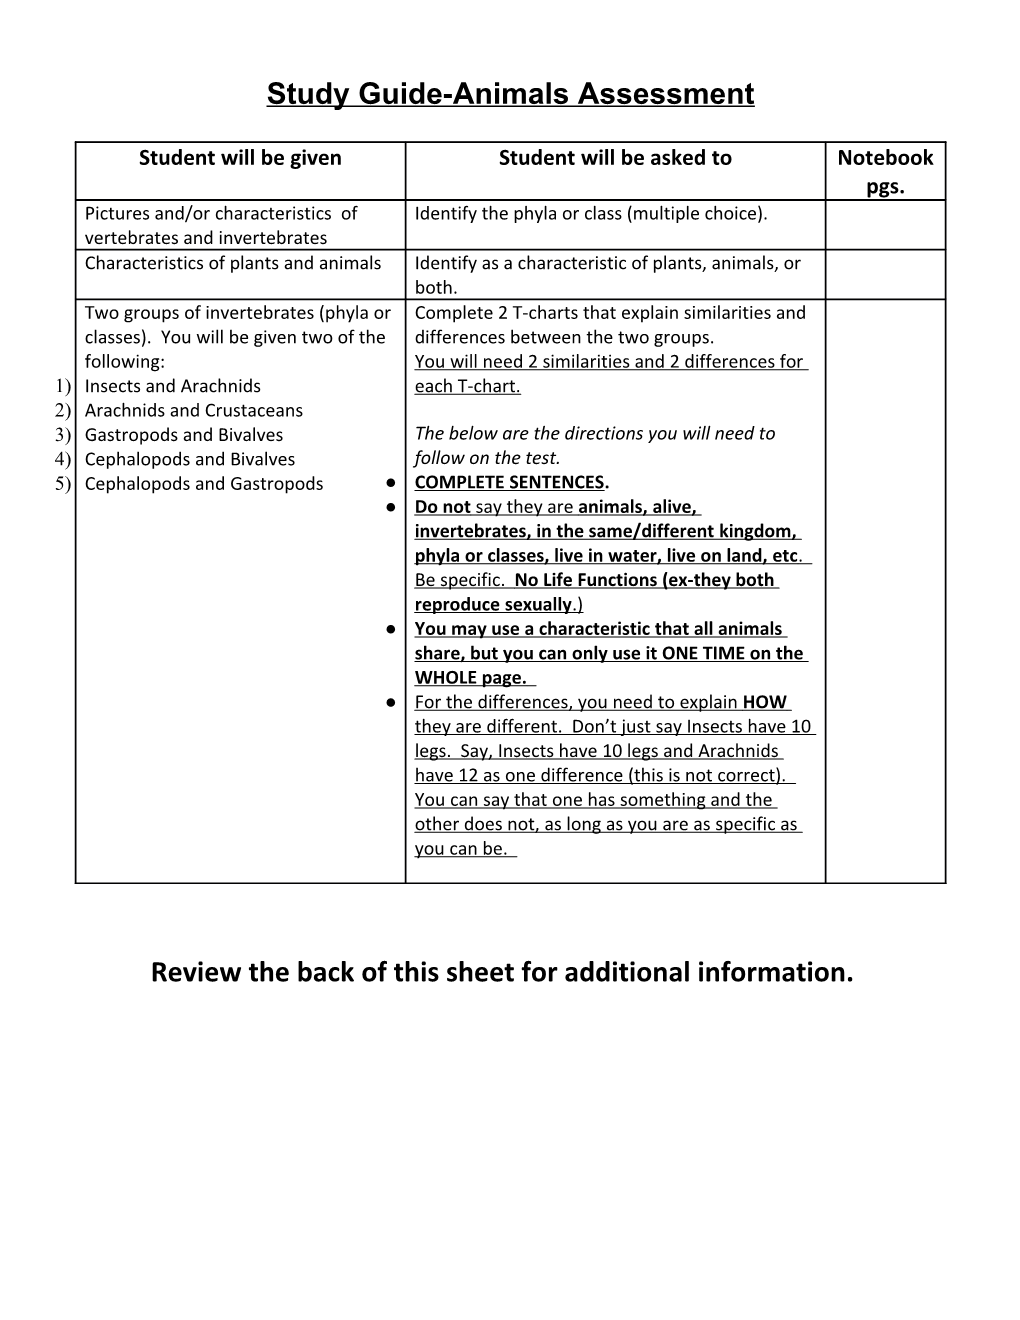 Review the Back of This Sheet for Additional Information